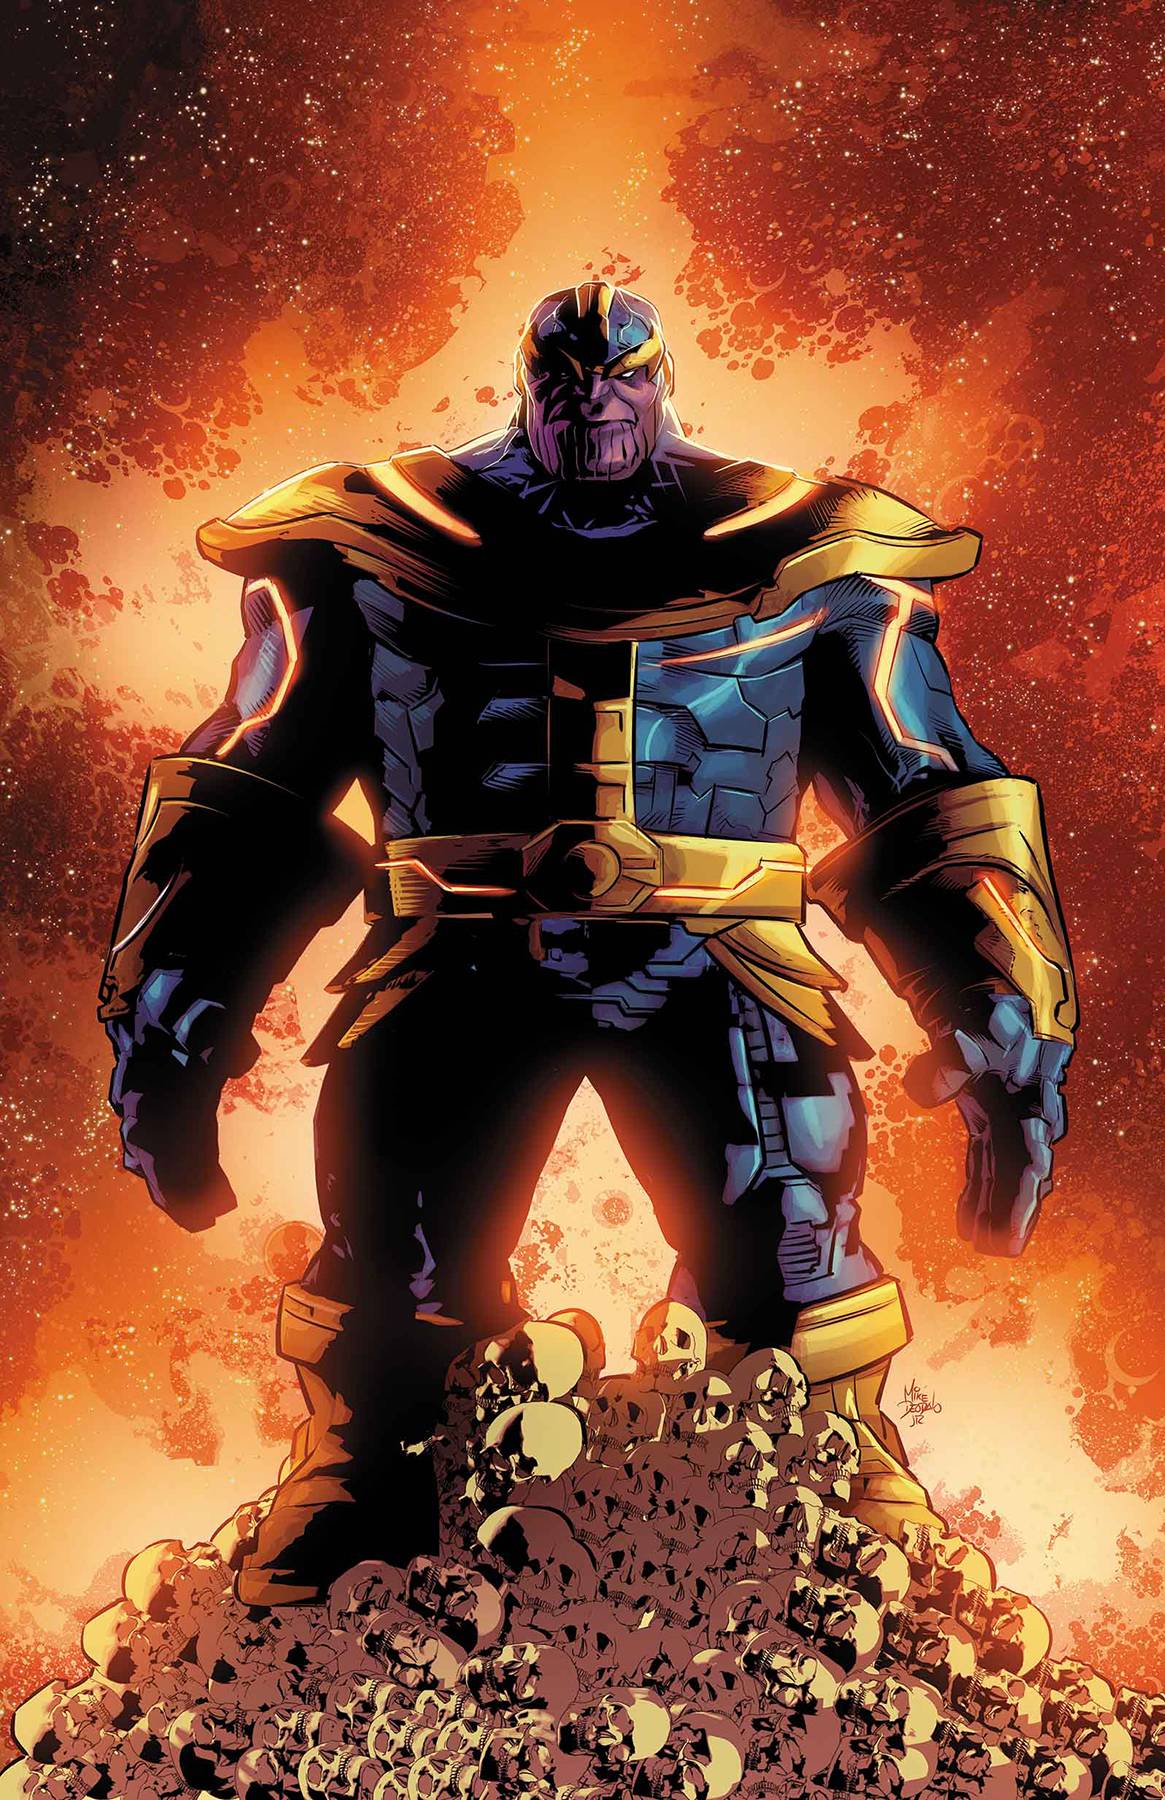 THANOS BY DEODATO POSTER